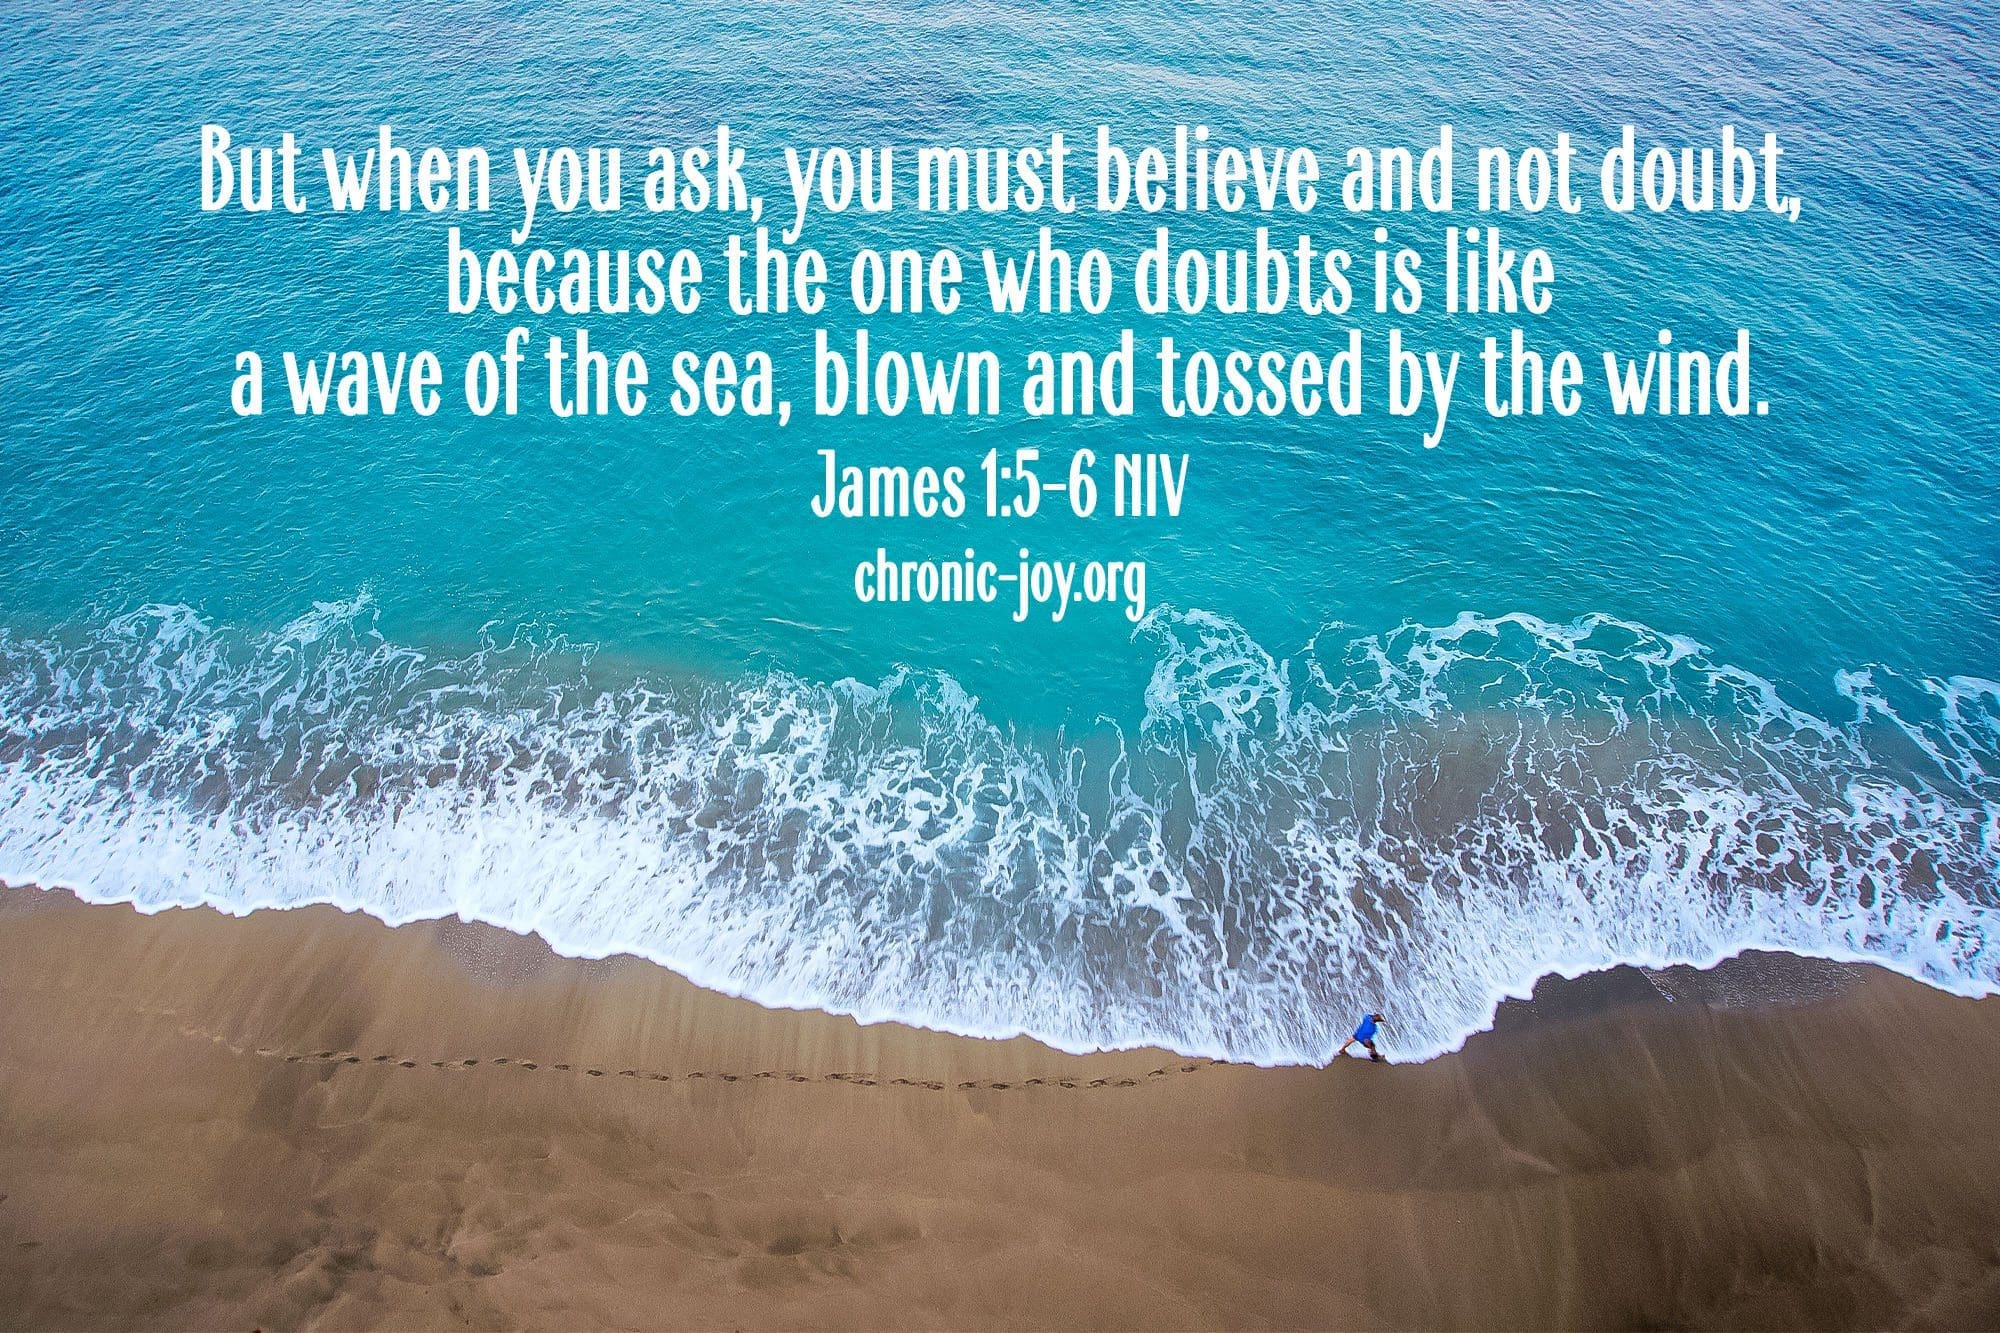 "But when you ask, you must believe and not doubt, because the one who doubts is like a wave of the sea, blown and tossed by the wind." James 1:5-6 NIV